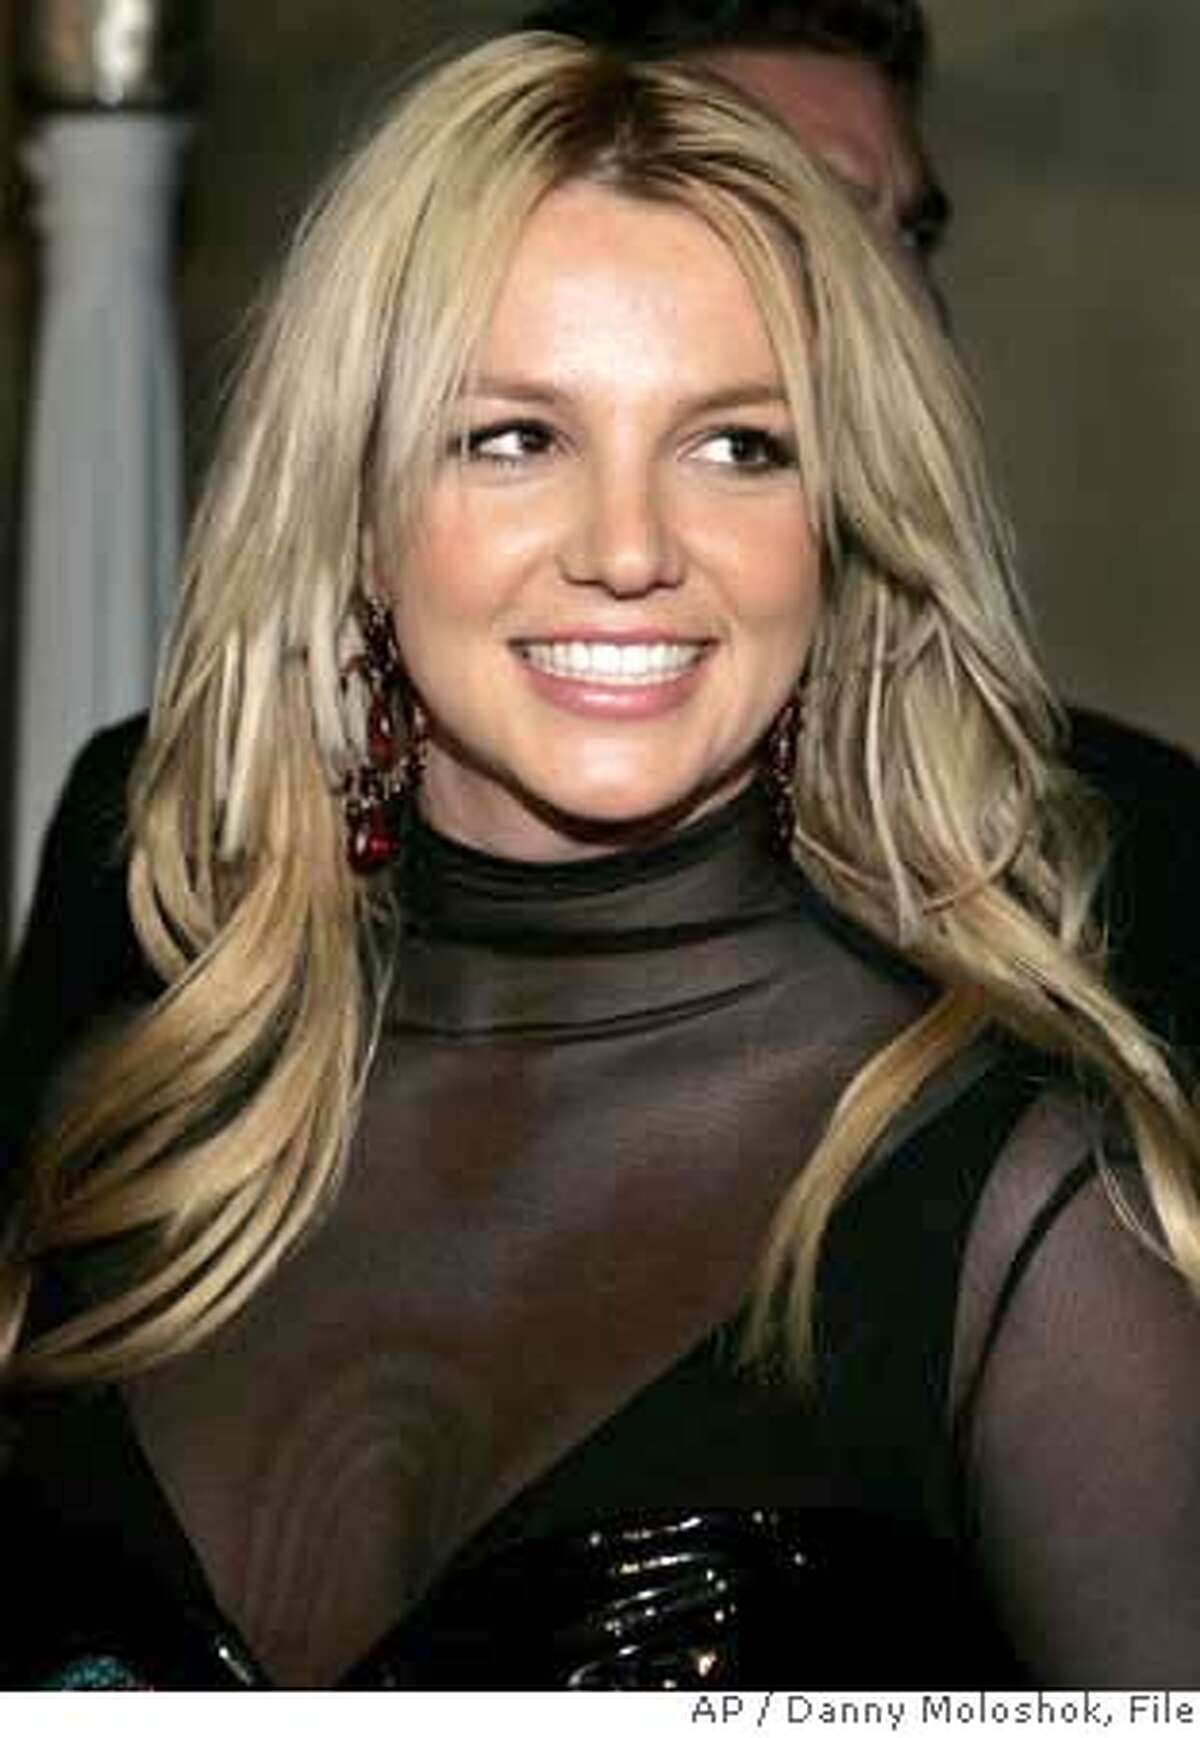 **FILE** In a file photo Britney Spears arrives for a post Grammy Awards party at a private residence Feb. 8, 2006, in Beverly Hills, Calif. Britney Spears was taken from her house by ambulance early Thursday,Jan. 31, 2008,Los Angeles police said.(AP Photo/Danny Moloshok/file) A FEB 8 2006 FILE PHOTO